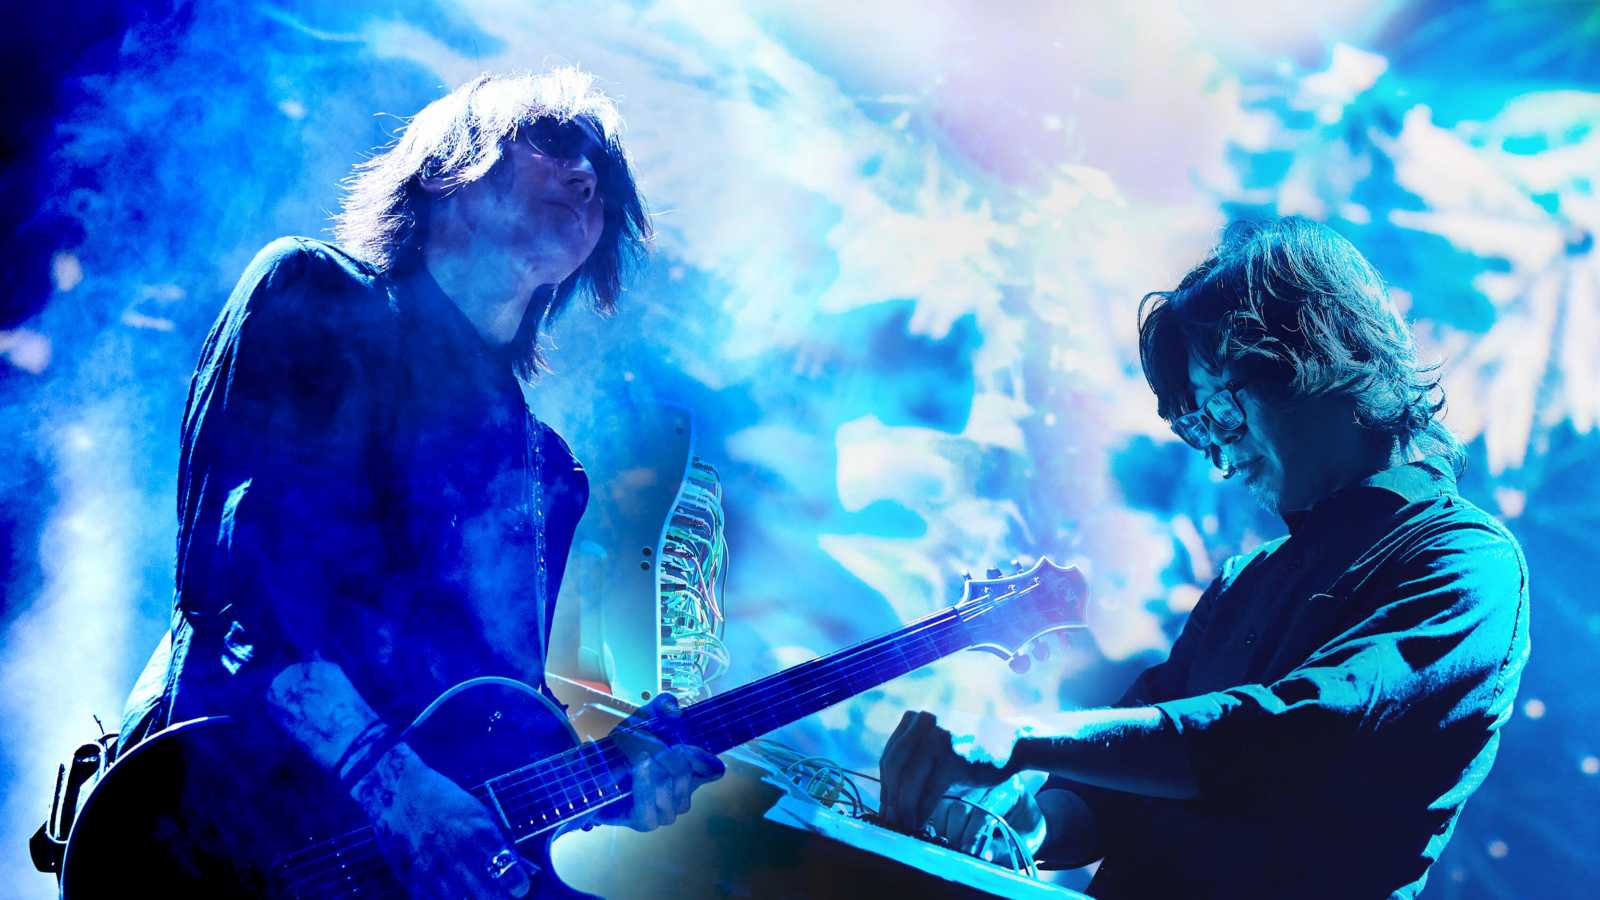 SUGIZO × HATAKEN Announce Online Show © SUGIZO x HATAKEN. All rights reserved.